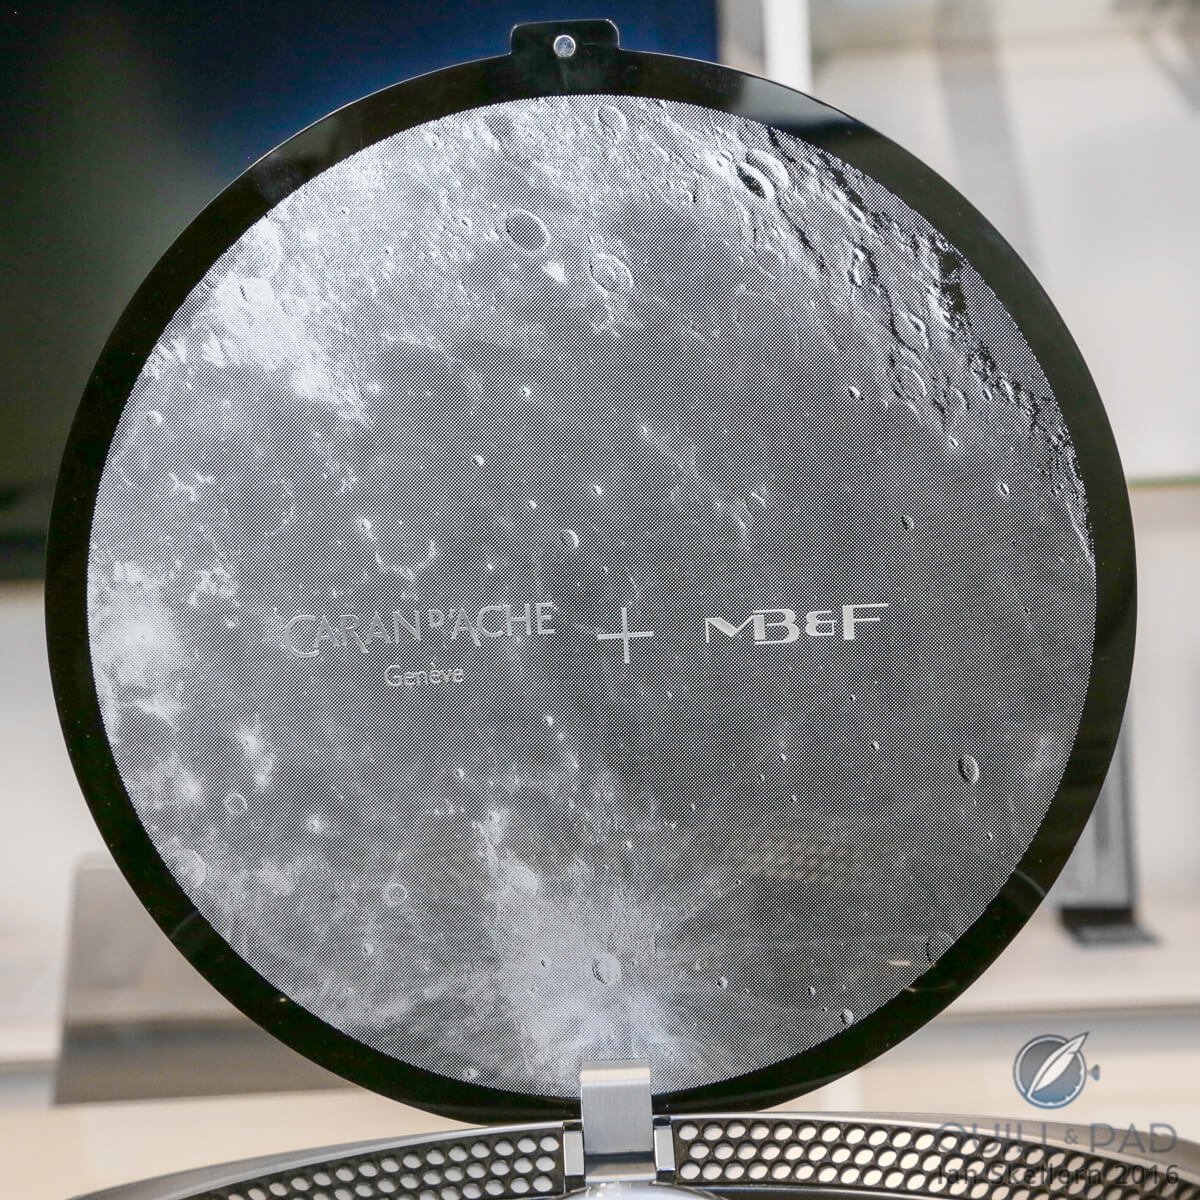 The inner lid of the Astrograph's landing pad case features a close up view of the Moon's surface